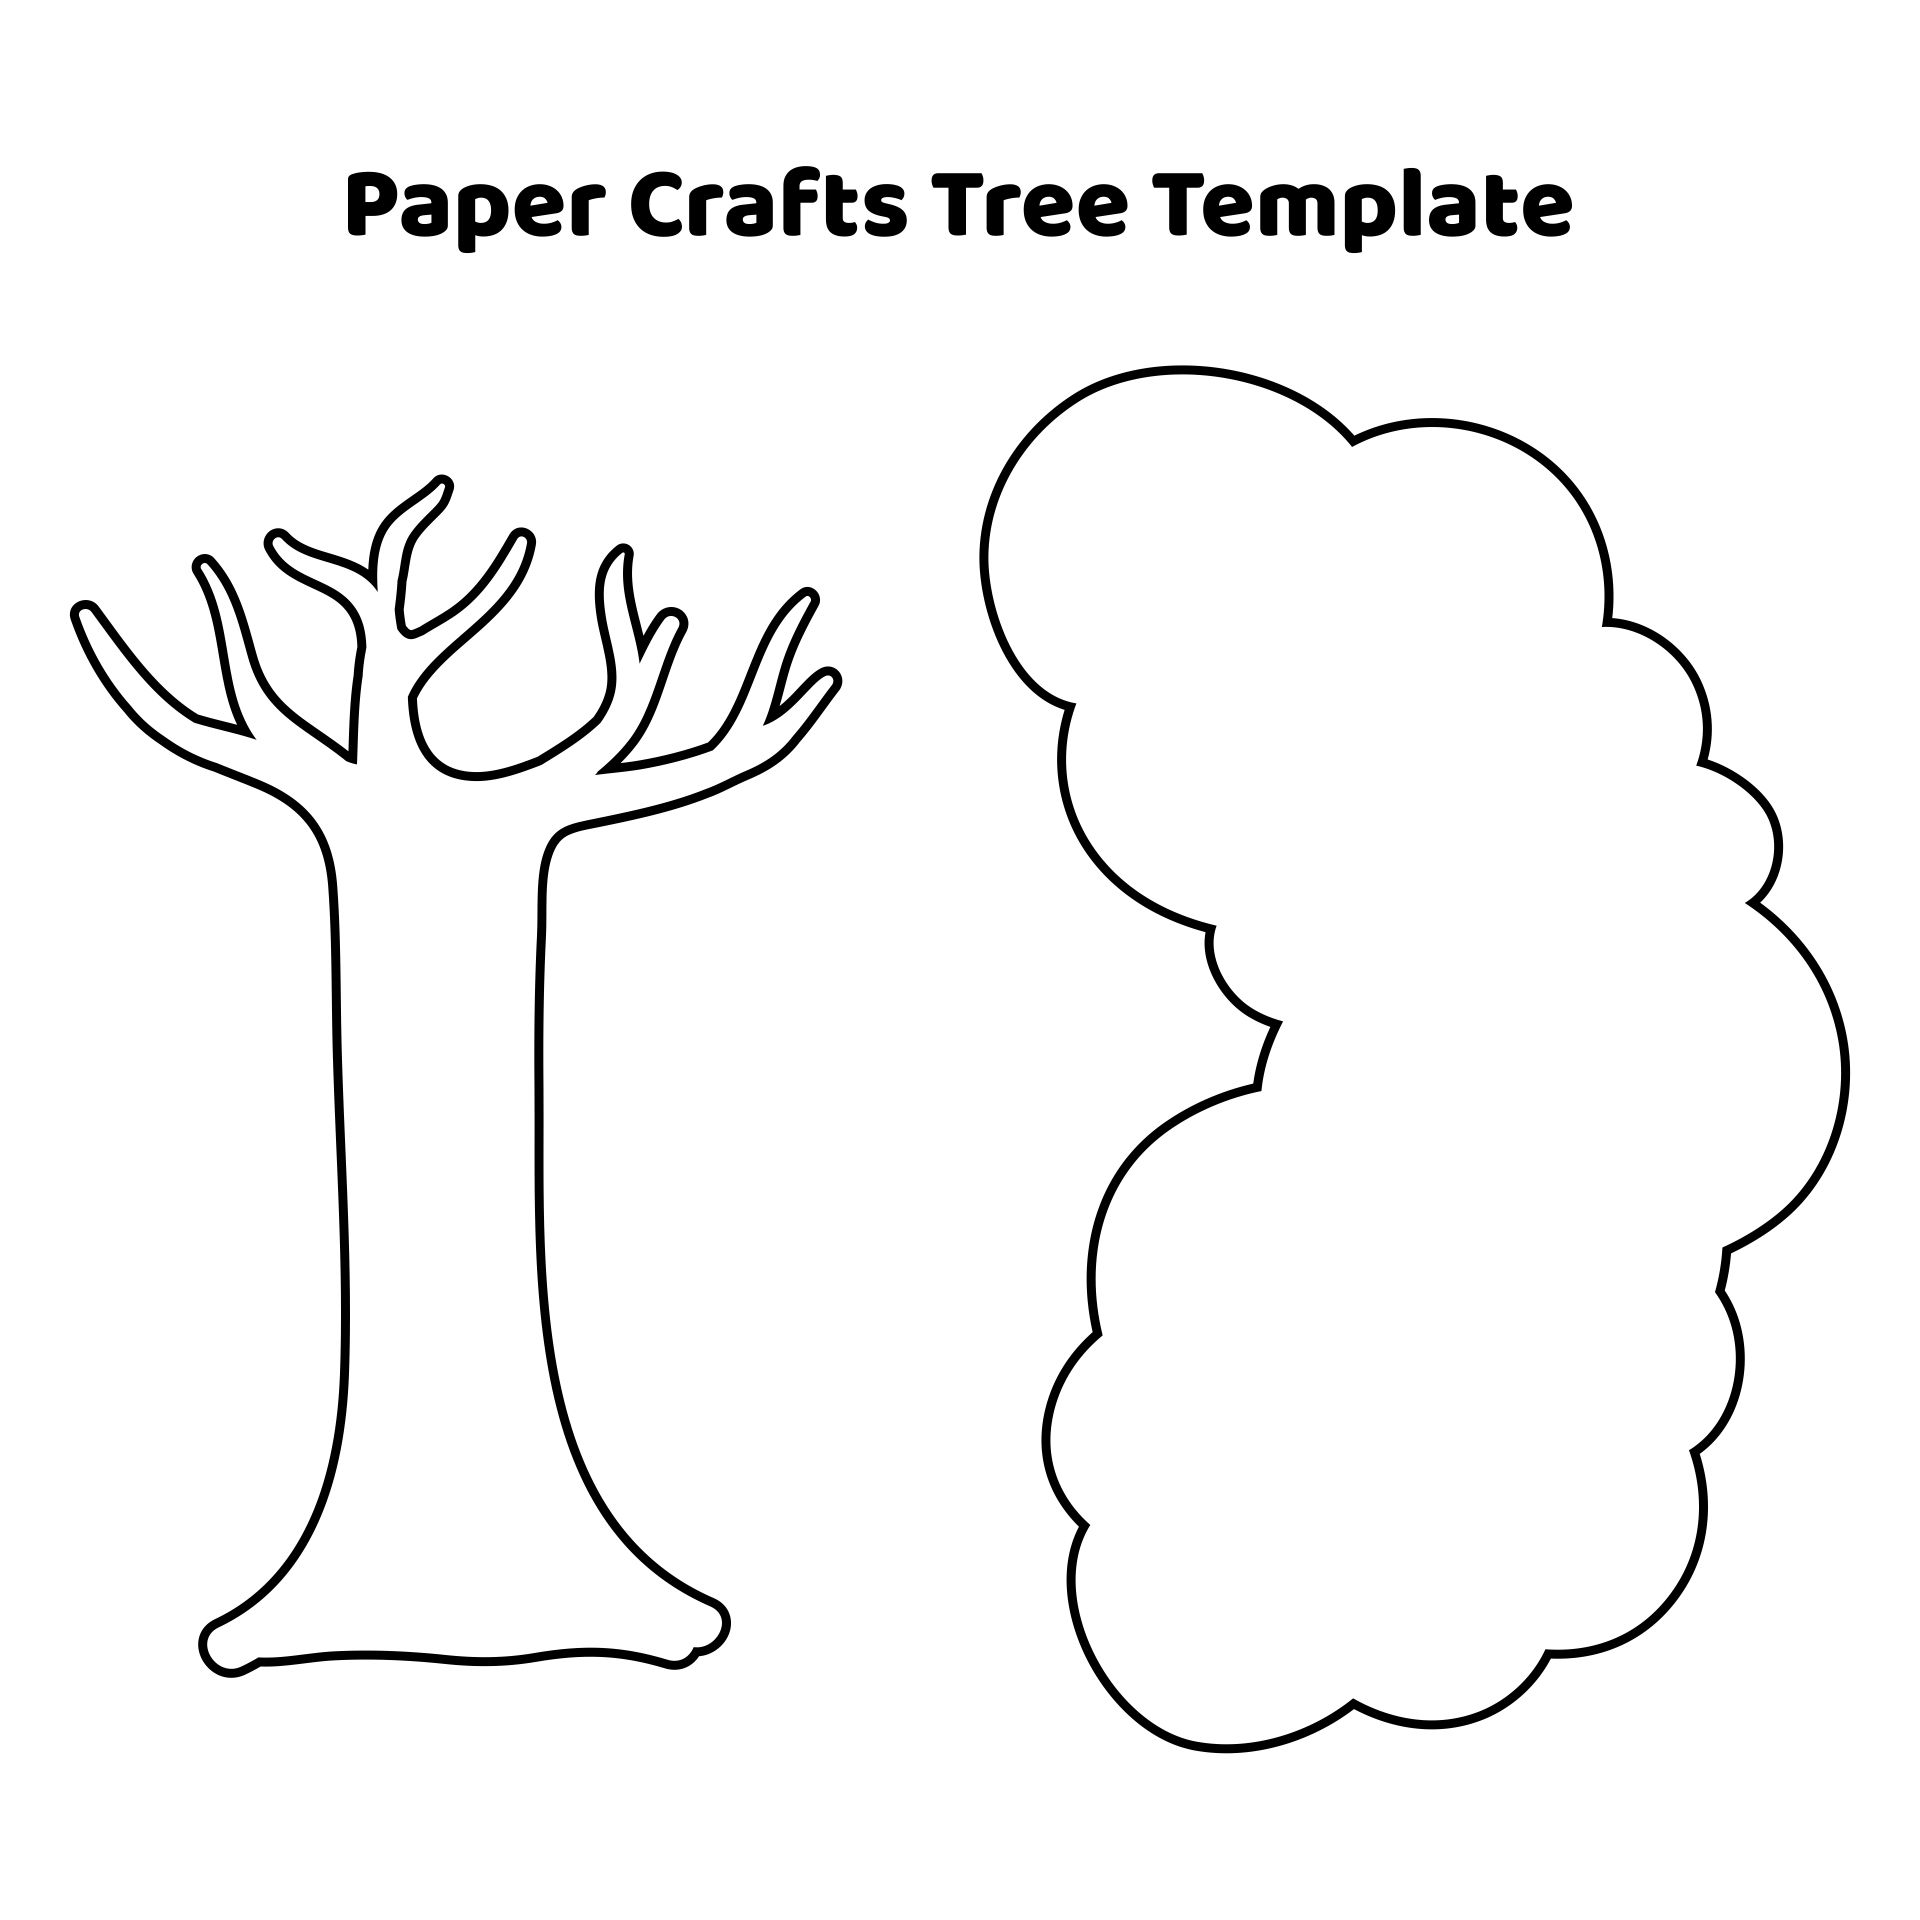 Paper Crafts Tree Template